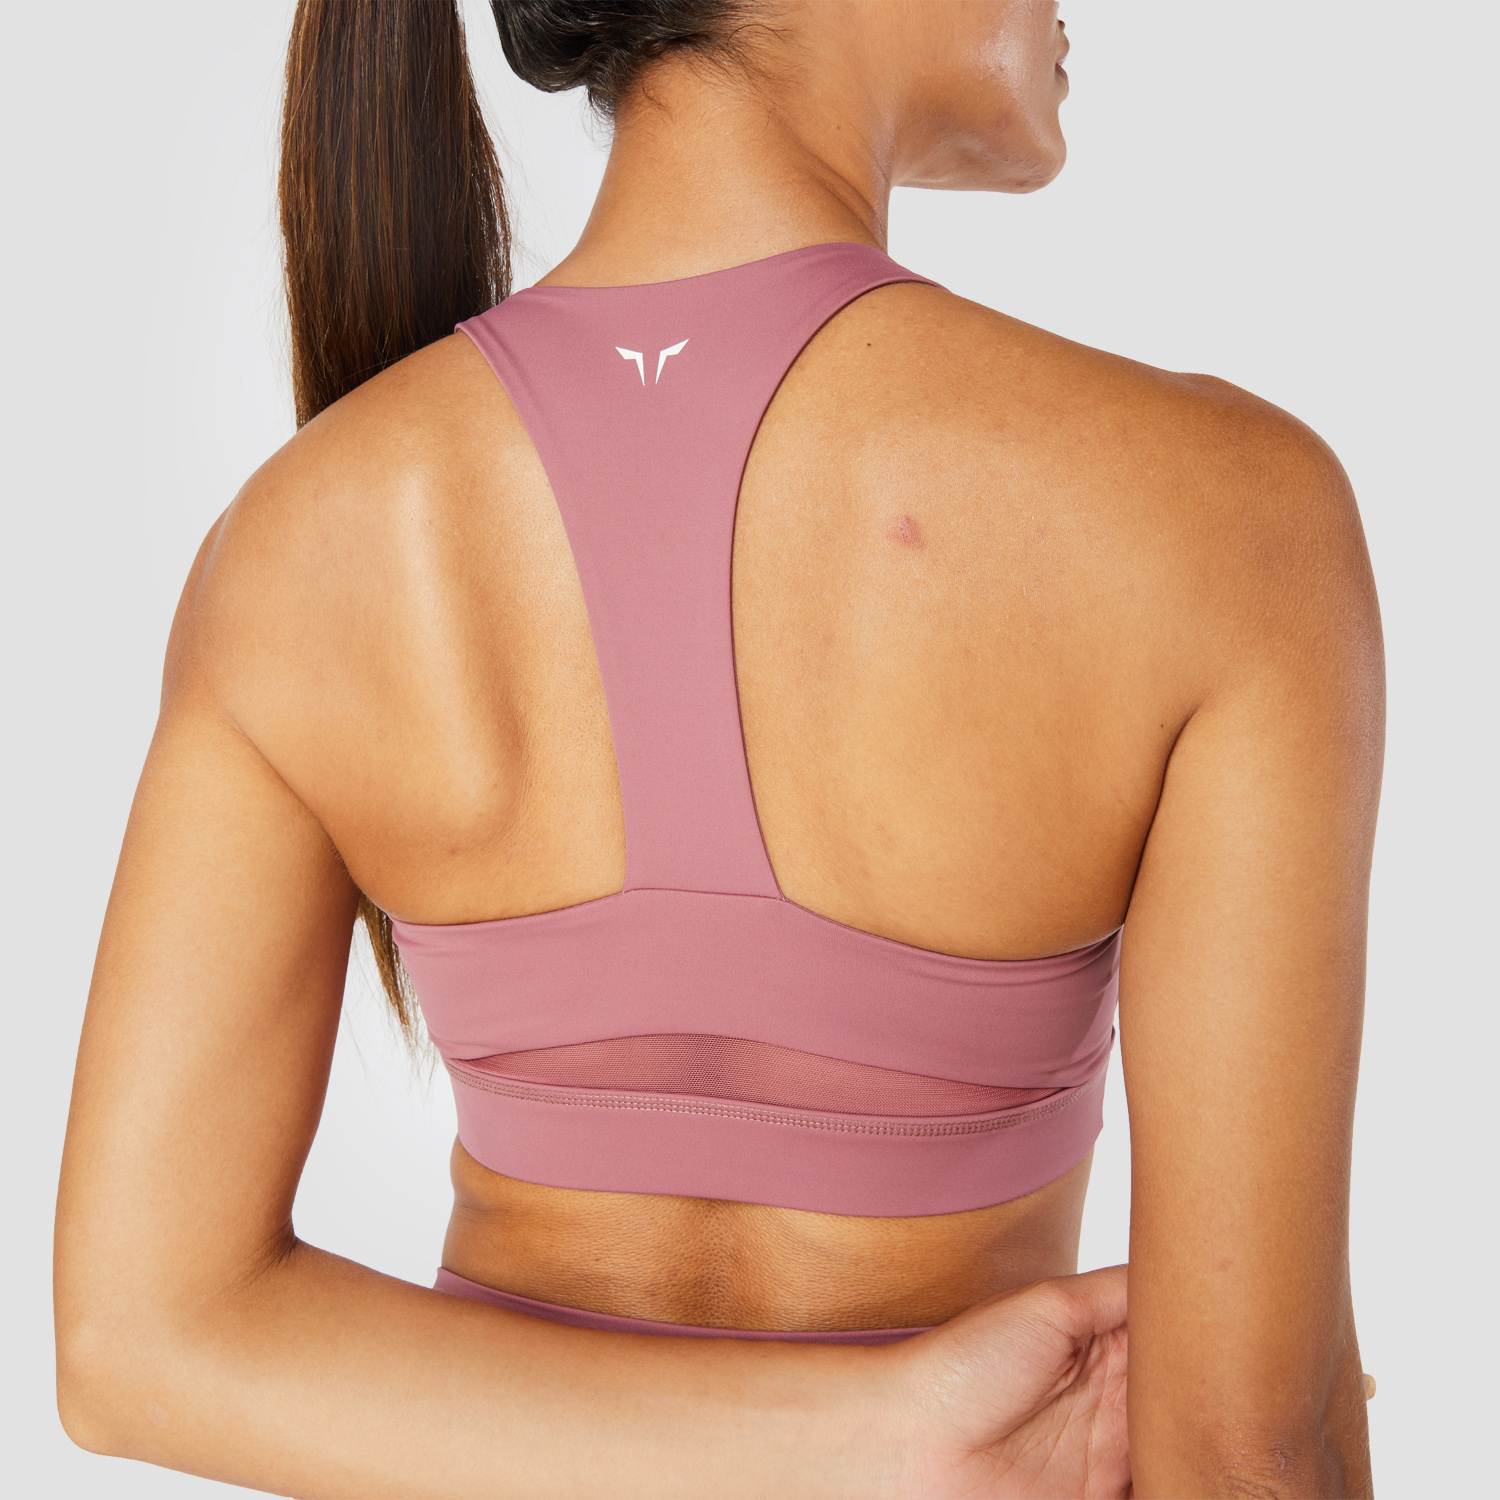 5 Tips on How to Properly Wash Your Sports Bra – Bloom Bras